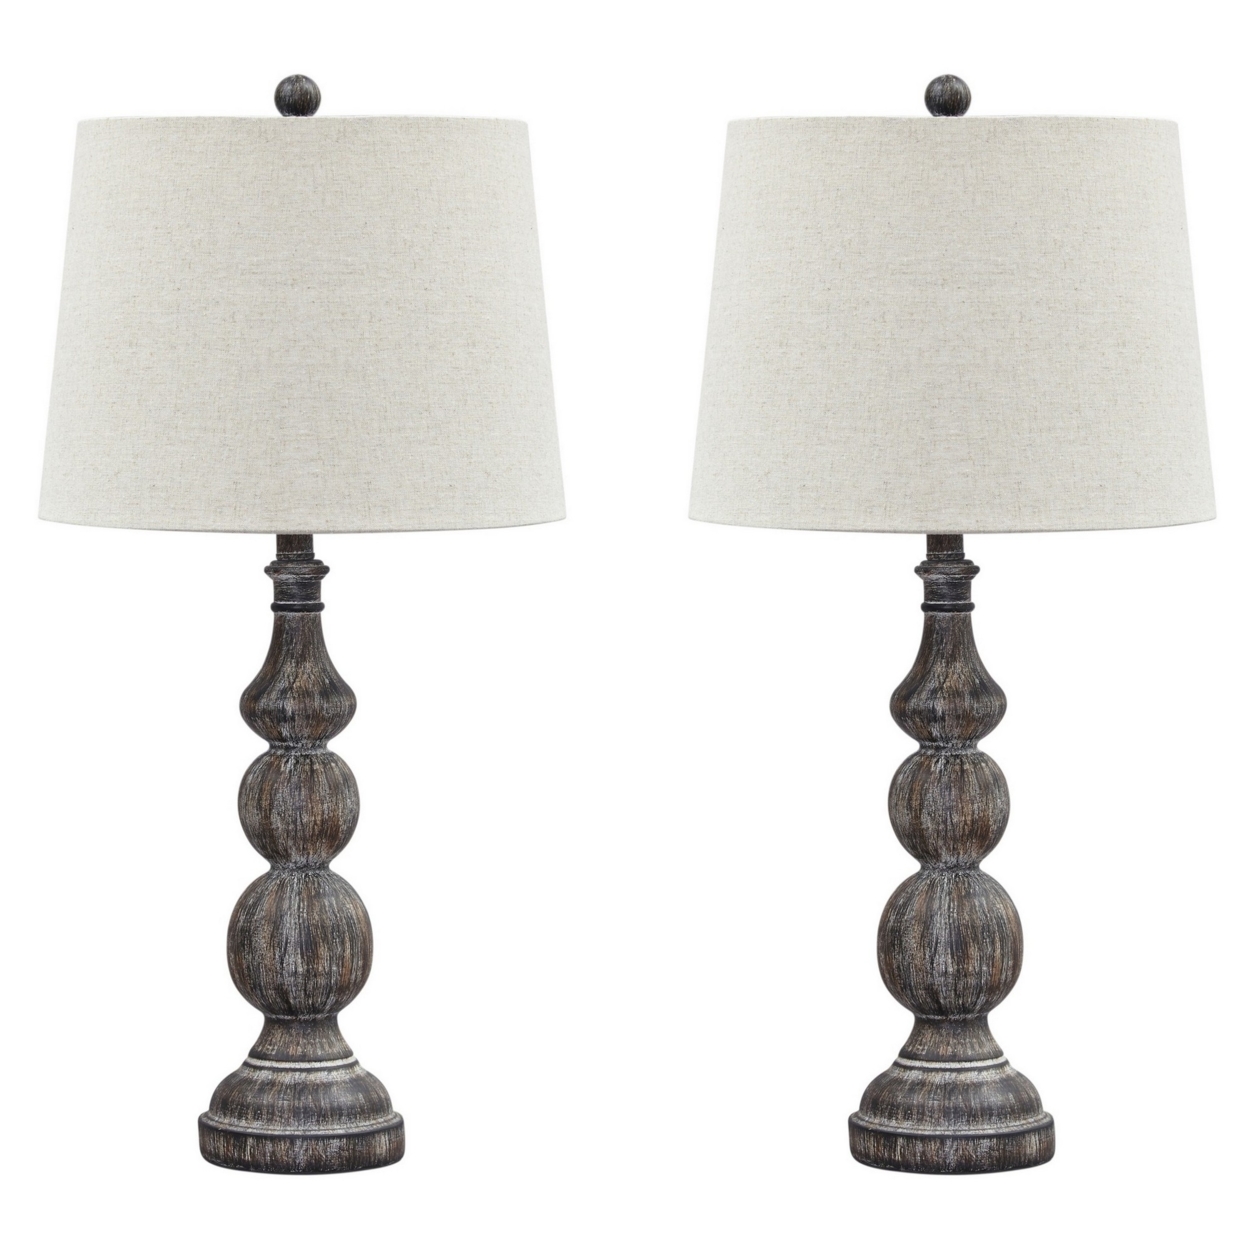 Polyresin Table Lamp With Turned Base, Set Of 2, Brown And Off White- Saltoro Sherpi